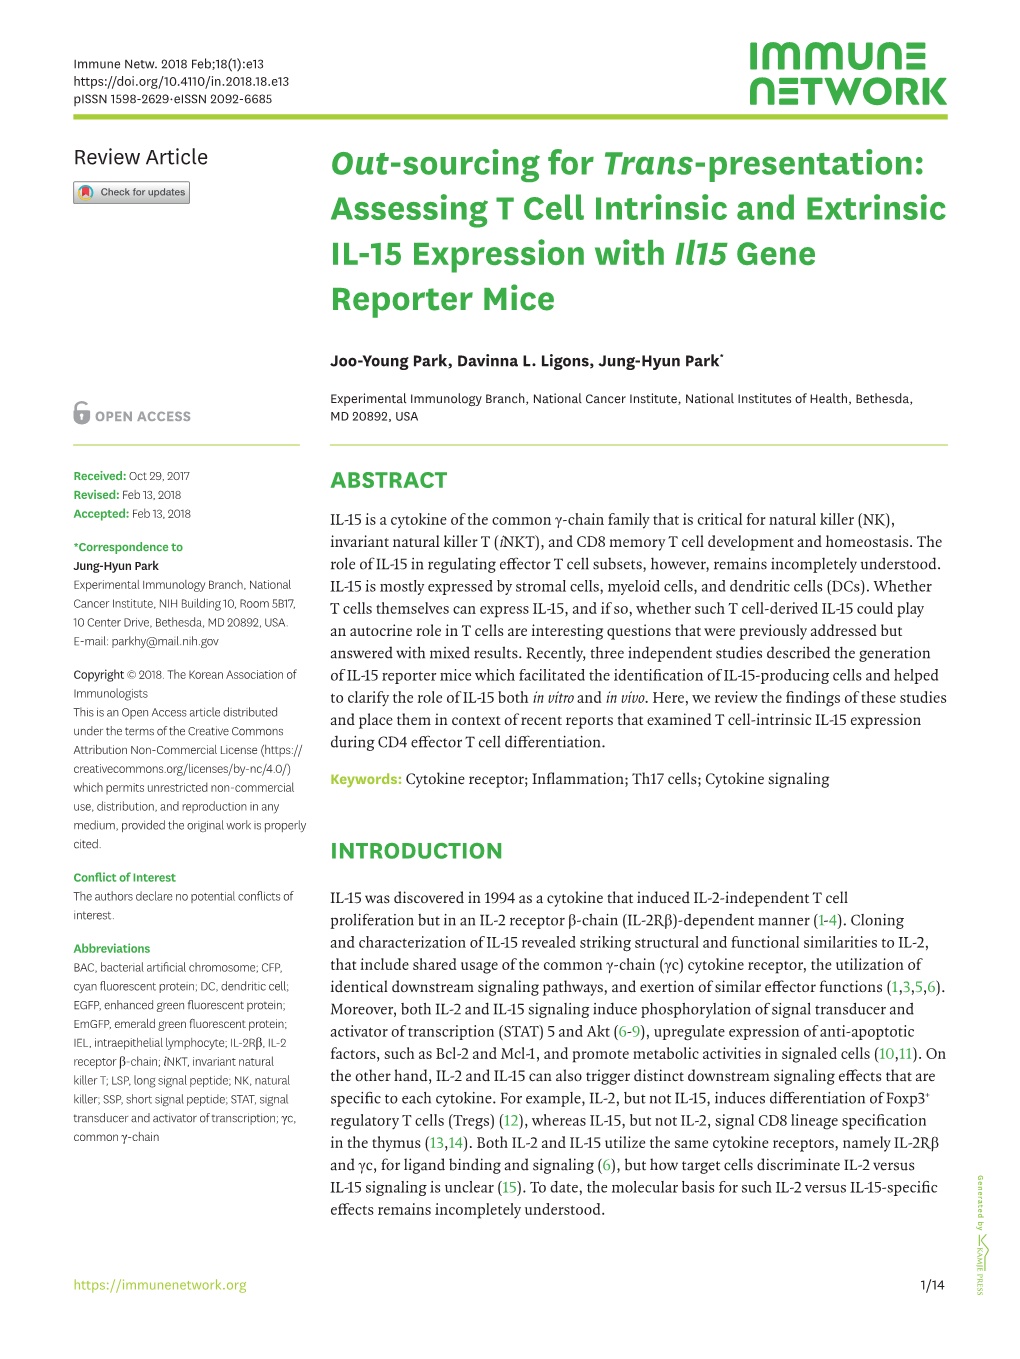 Assessing T Cell Intrinsic and Extrinsic IL-15 Expression with Il15 Gene Reporter Mice